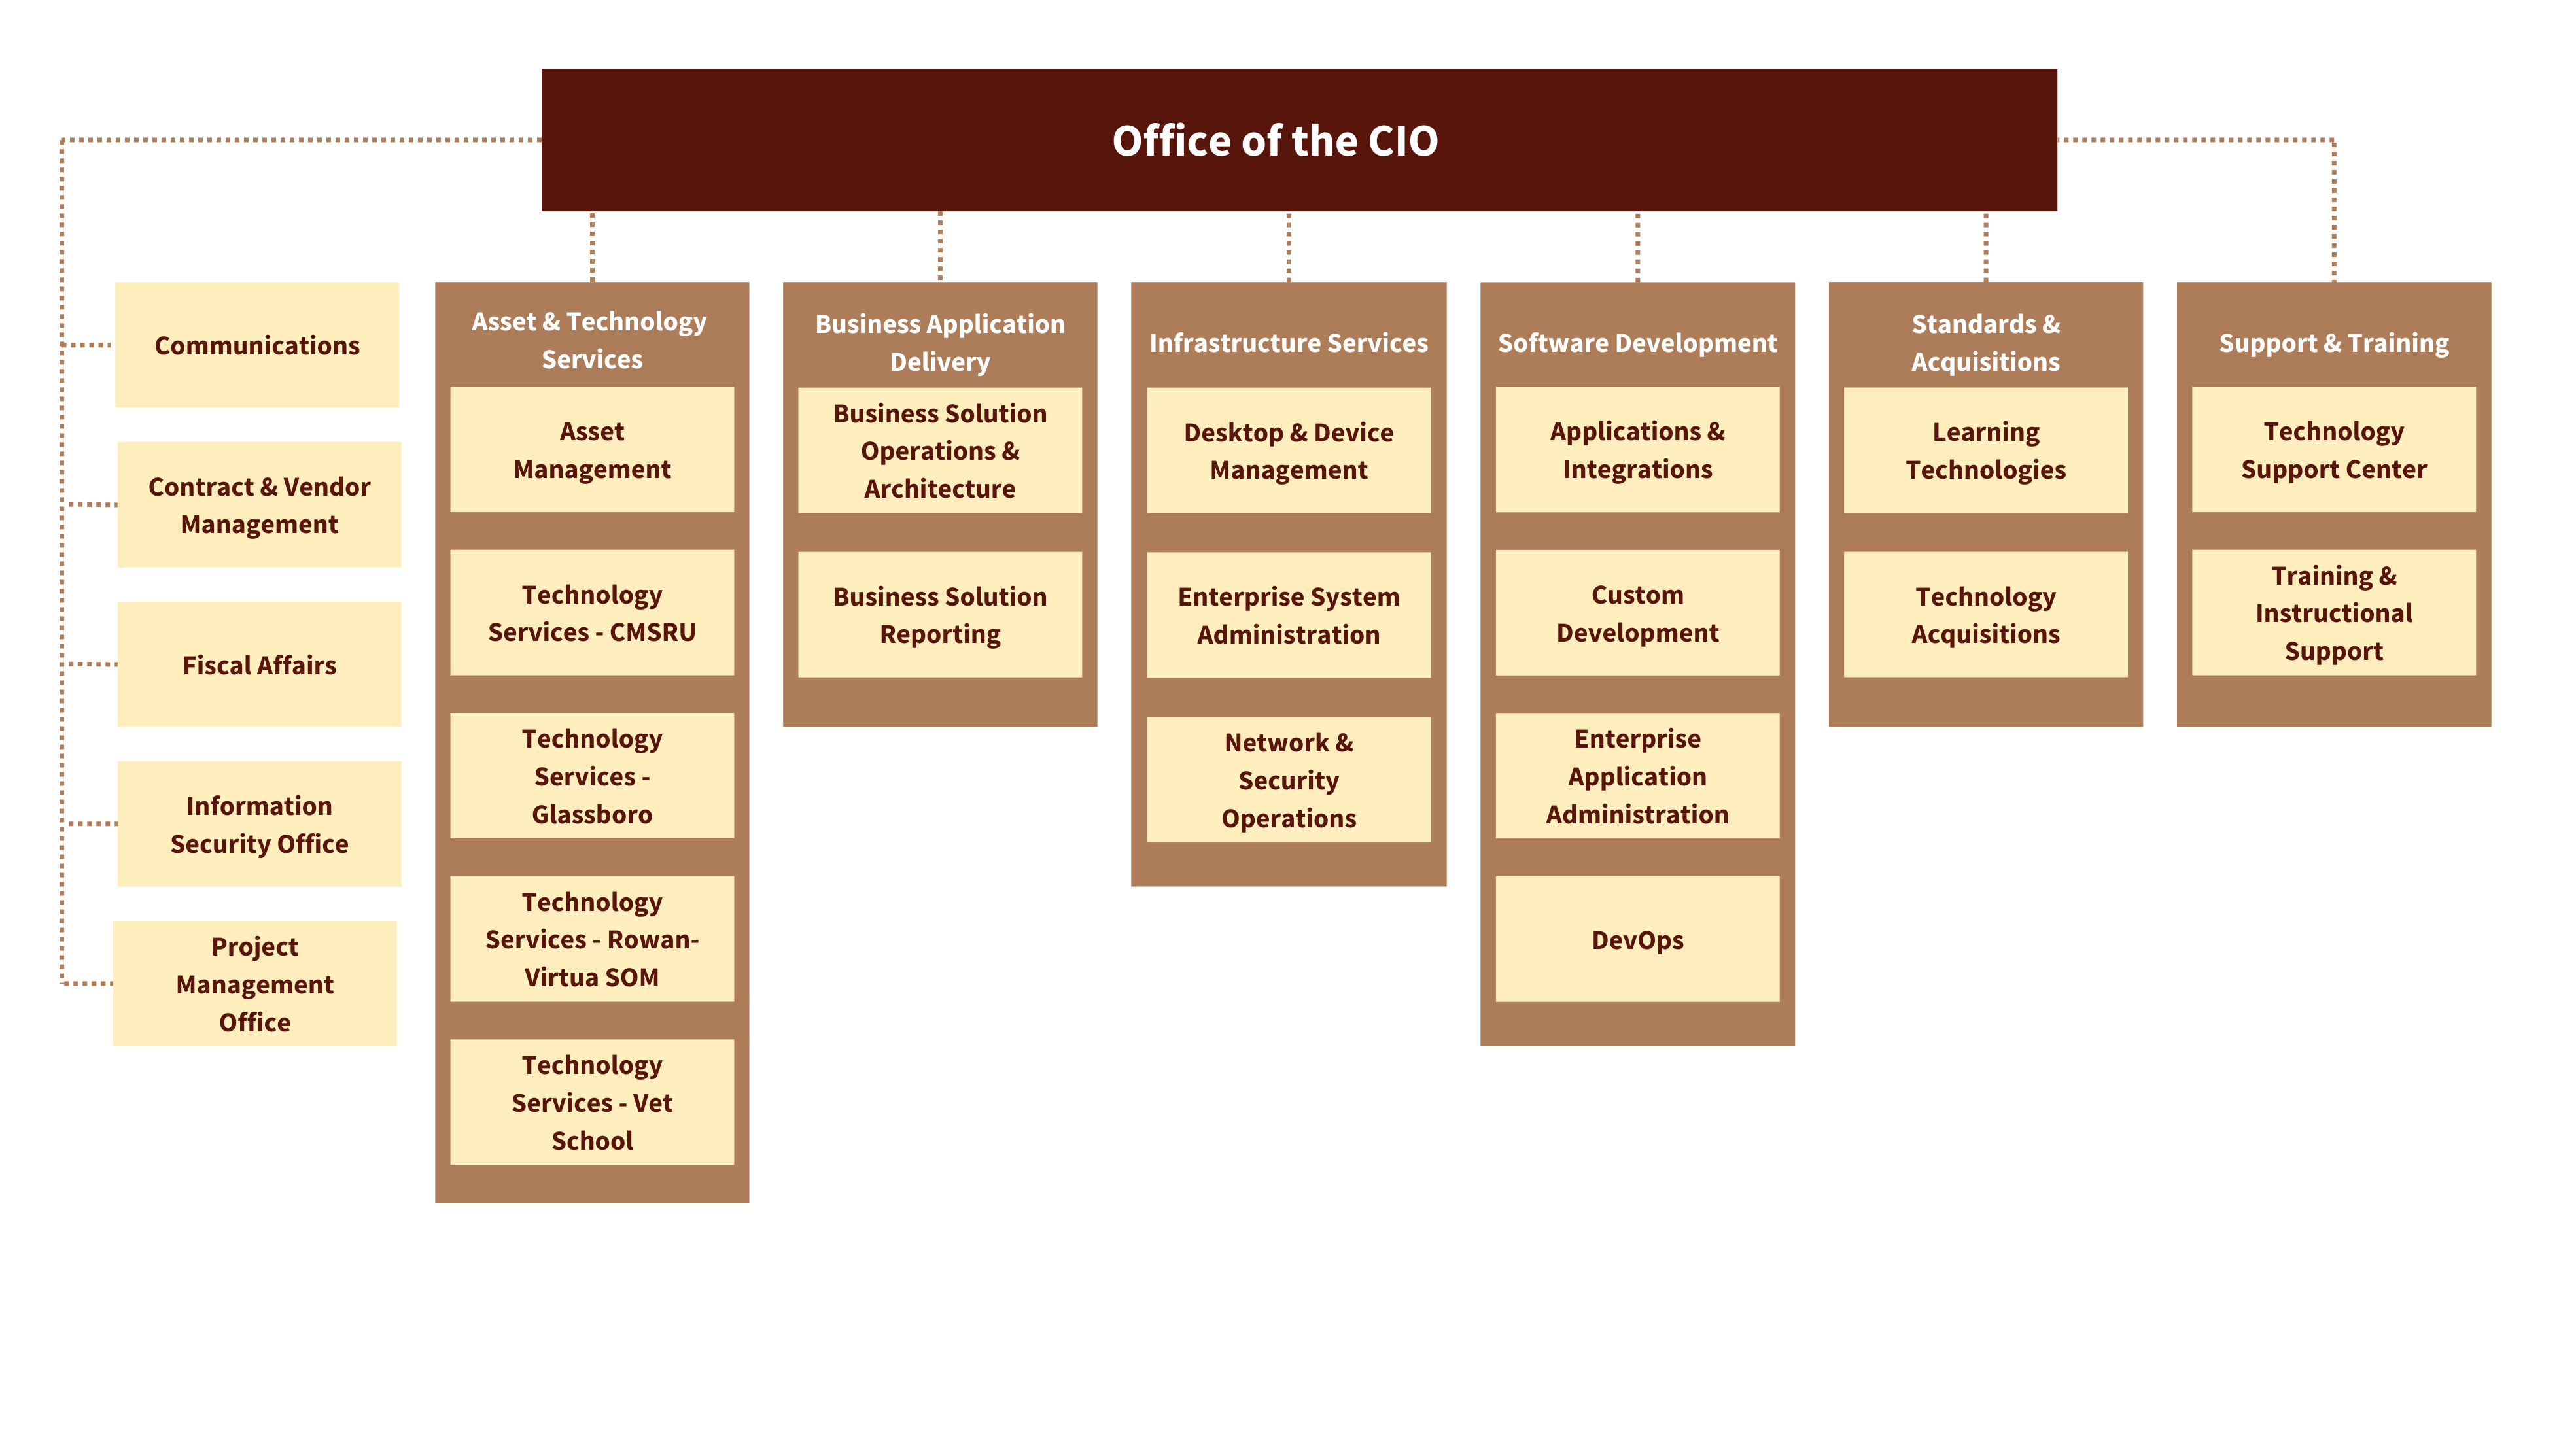 Image showing the departments within Information Resources & Technology at Rowan University, including Analytics, Systems & Applications, Clinical Systems, Operations, Information Security Office, Infrastructure Services, Project Management Office and Contract and Vendor management, all of which report to the Senior Vice President and CIO.